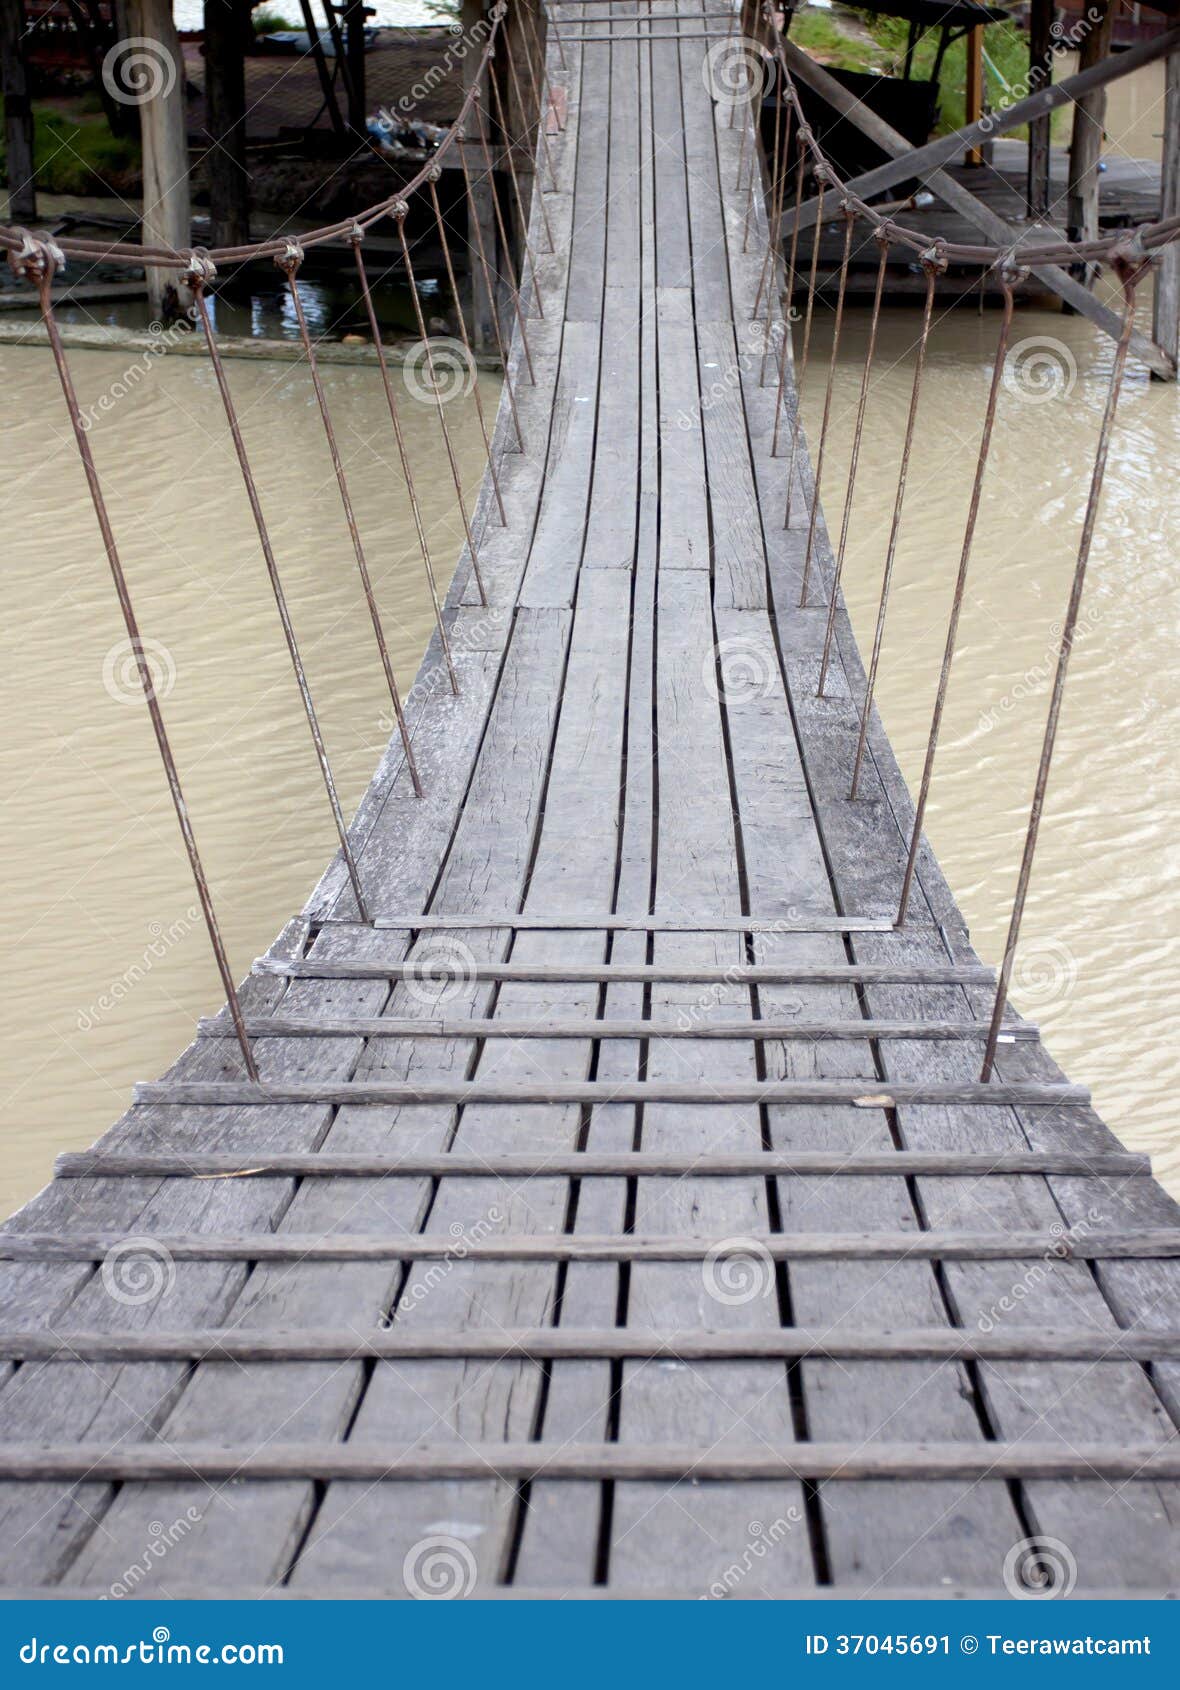 The Rope Wooden Bridge Direct To Another Side Stock Image - Image of  hiking, journey: 37045691